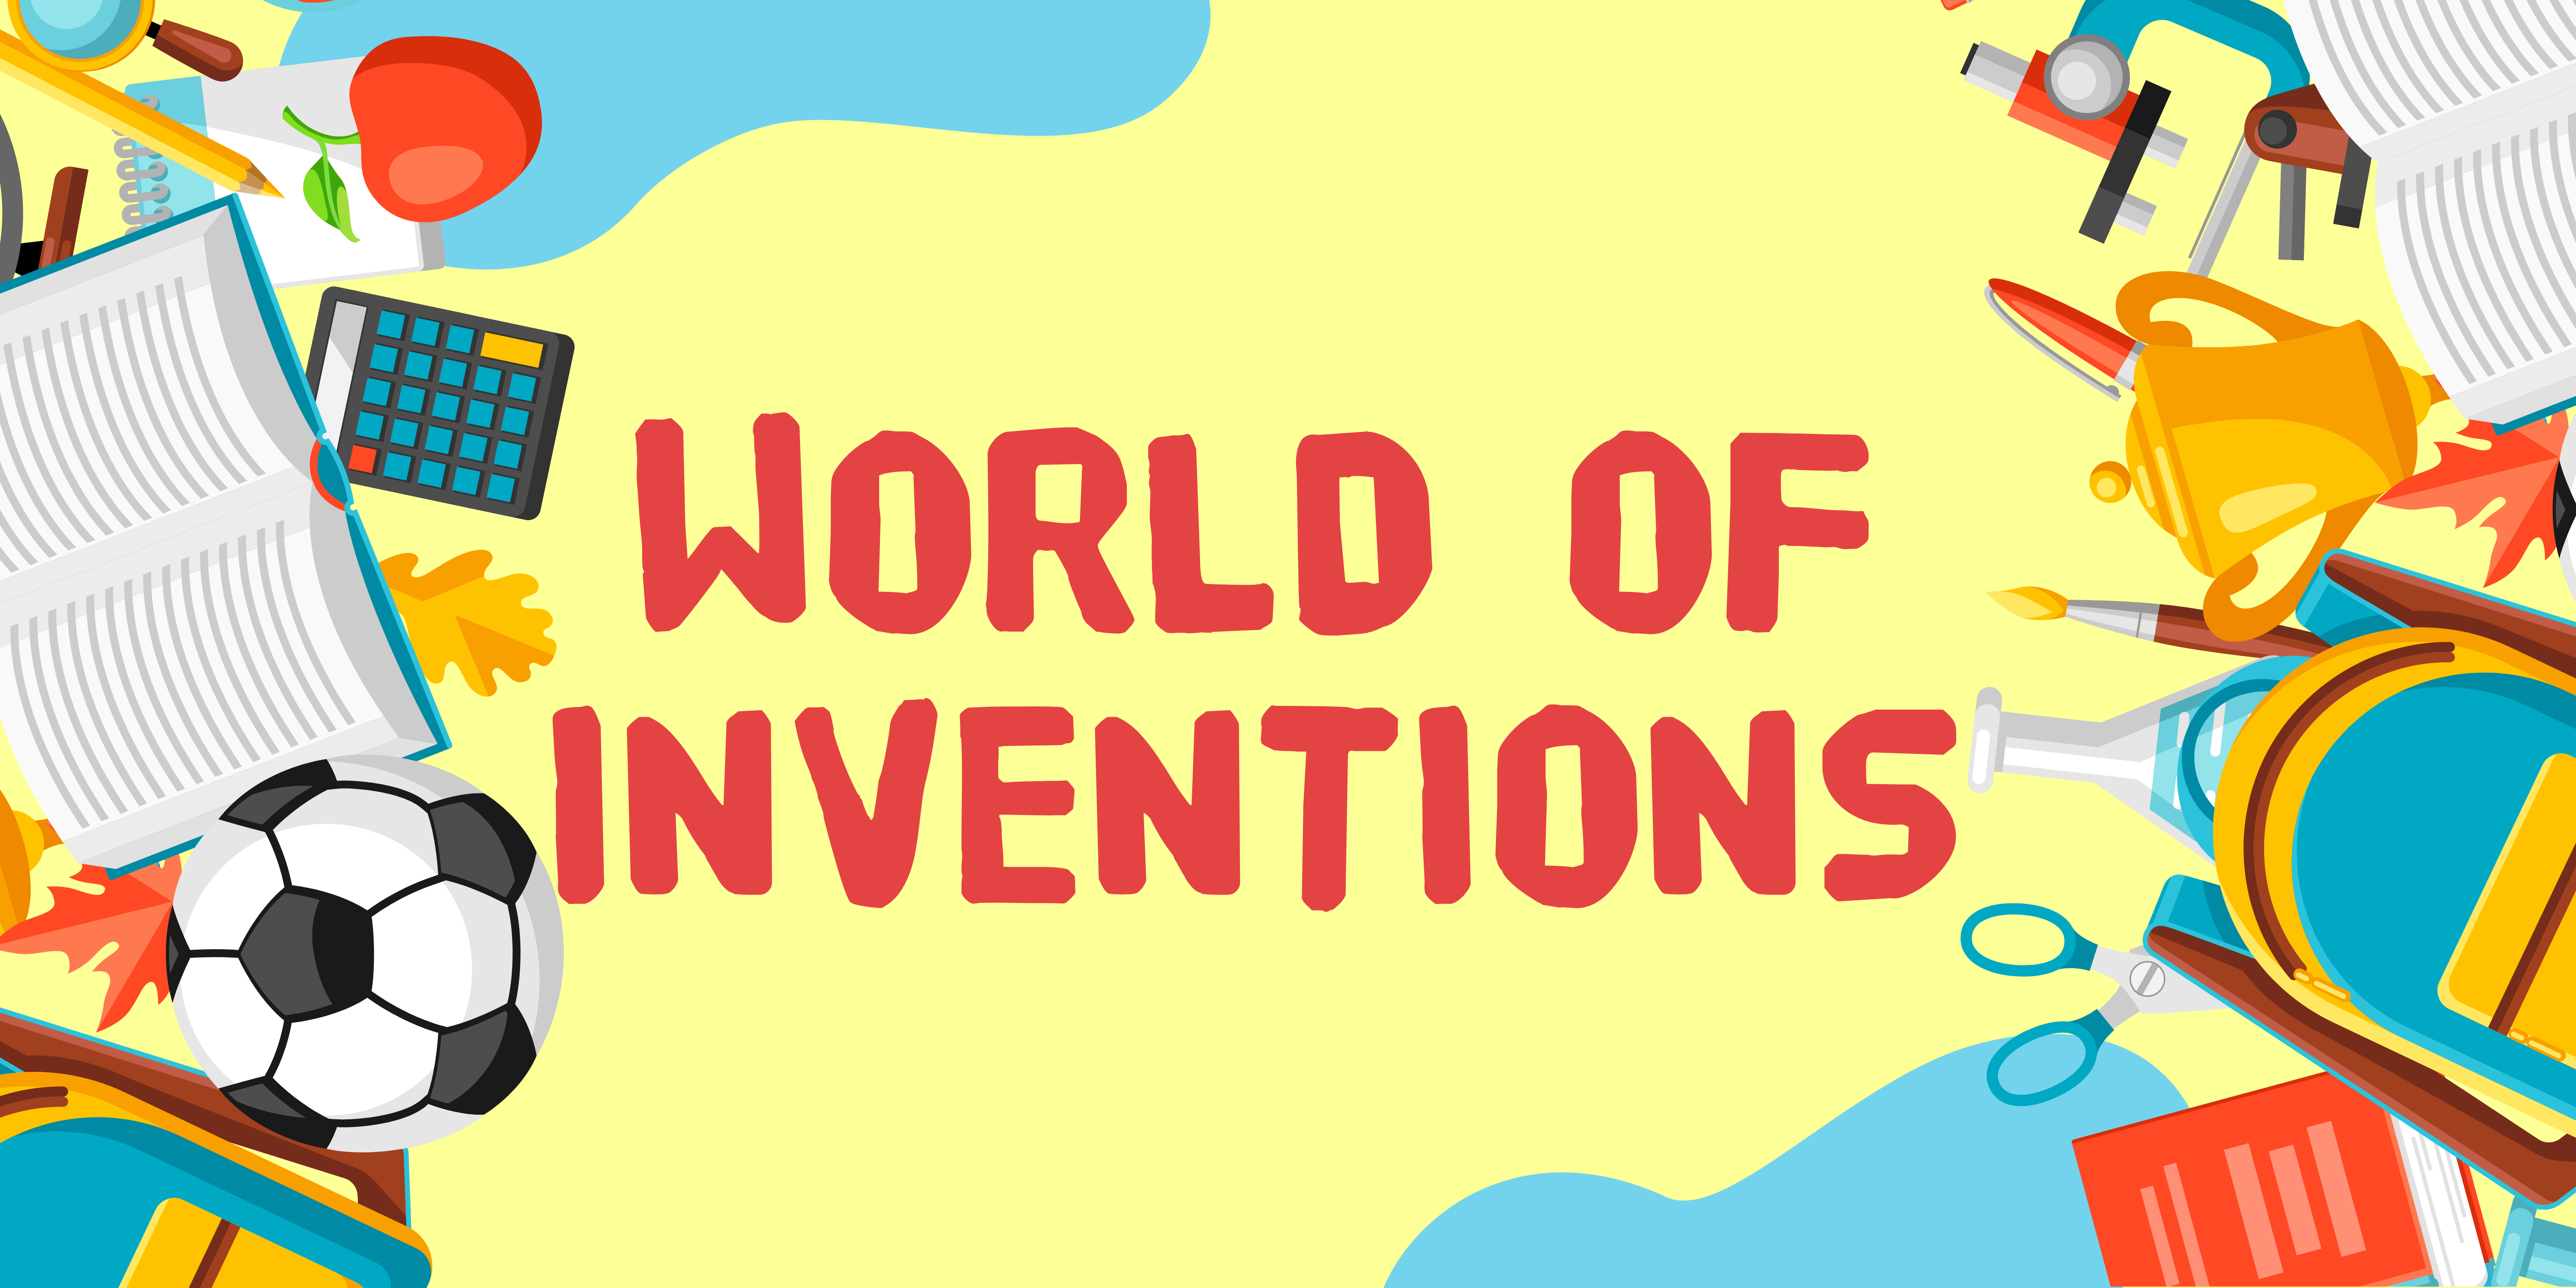 World of Inventions